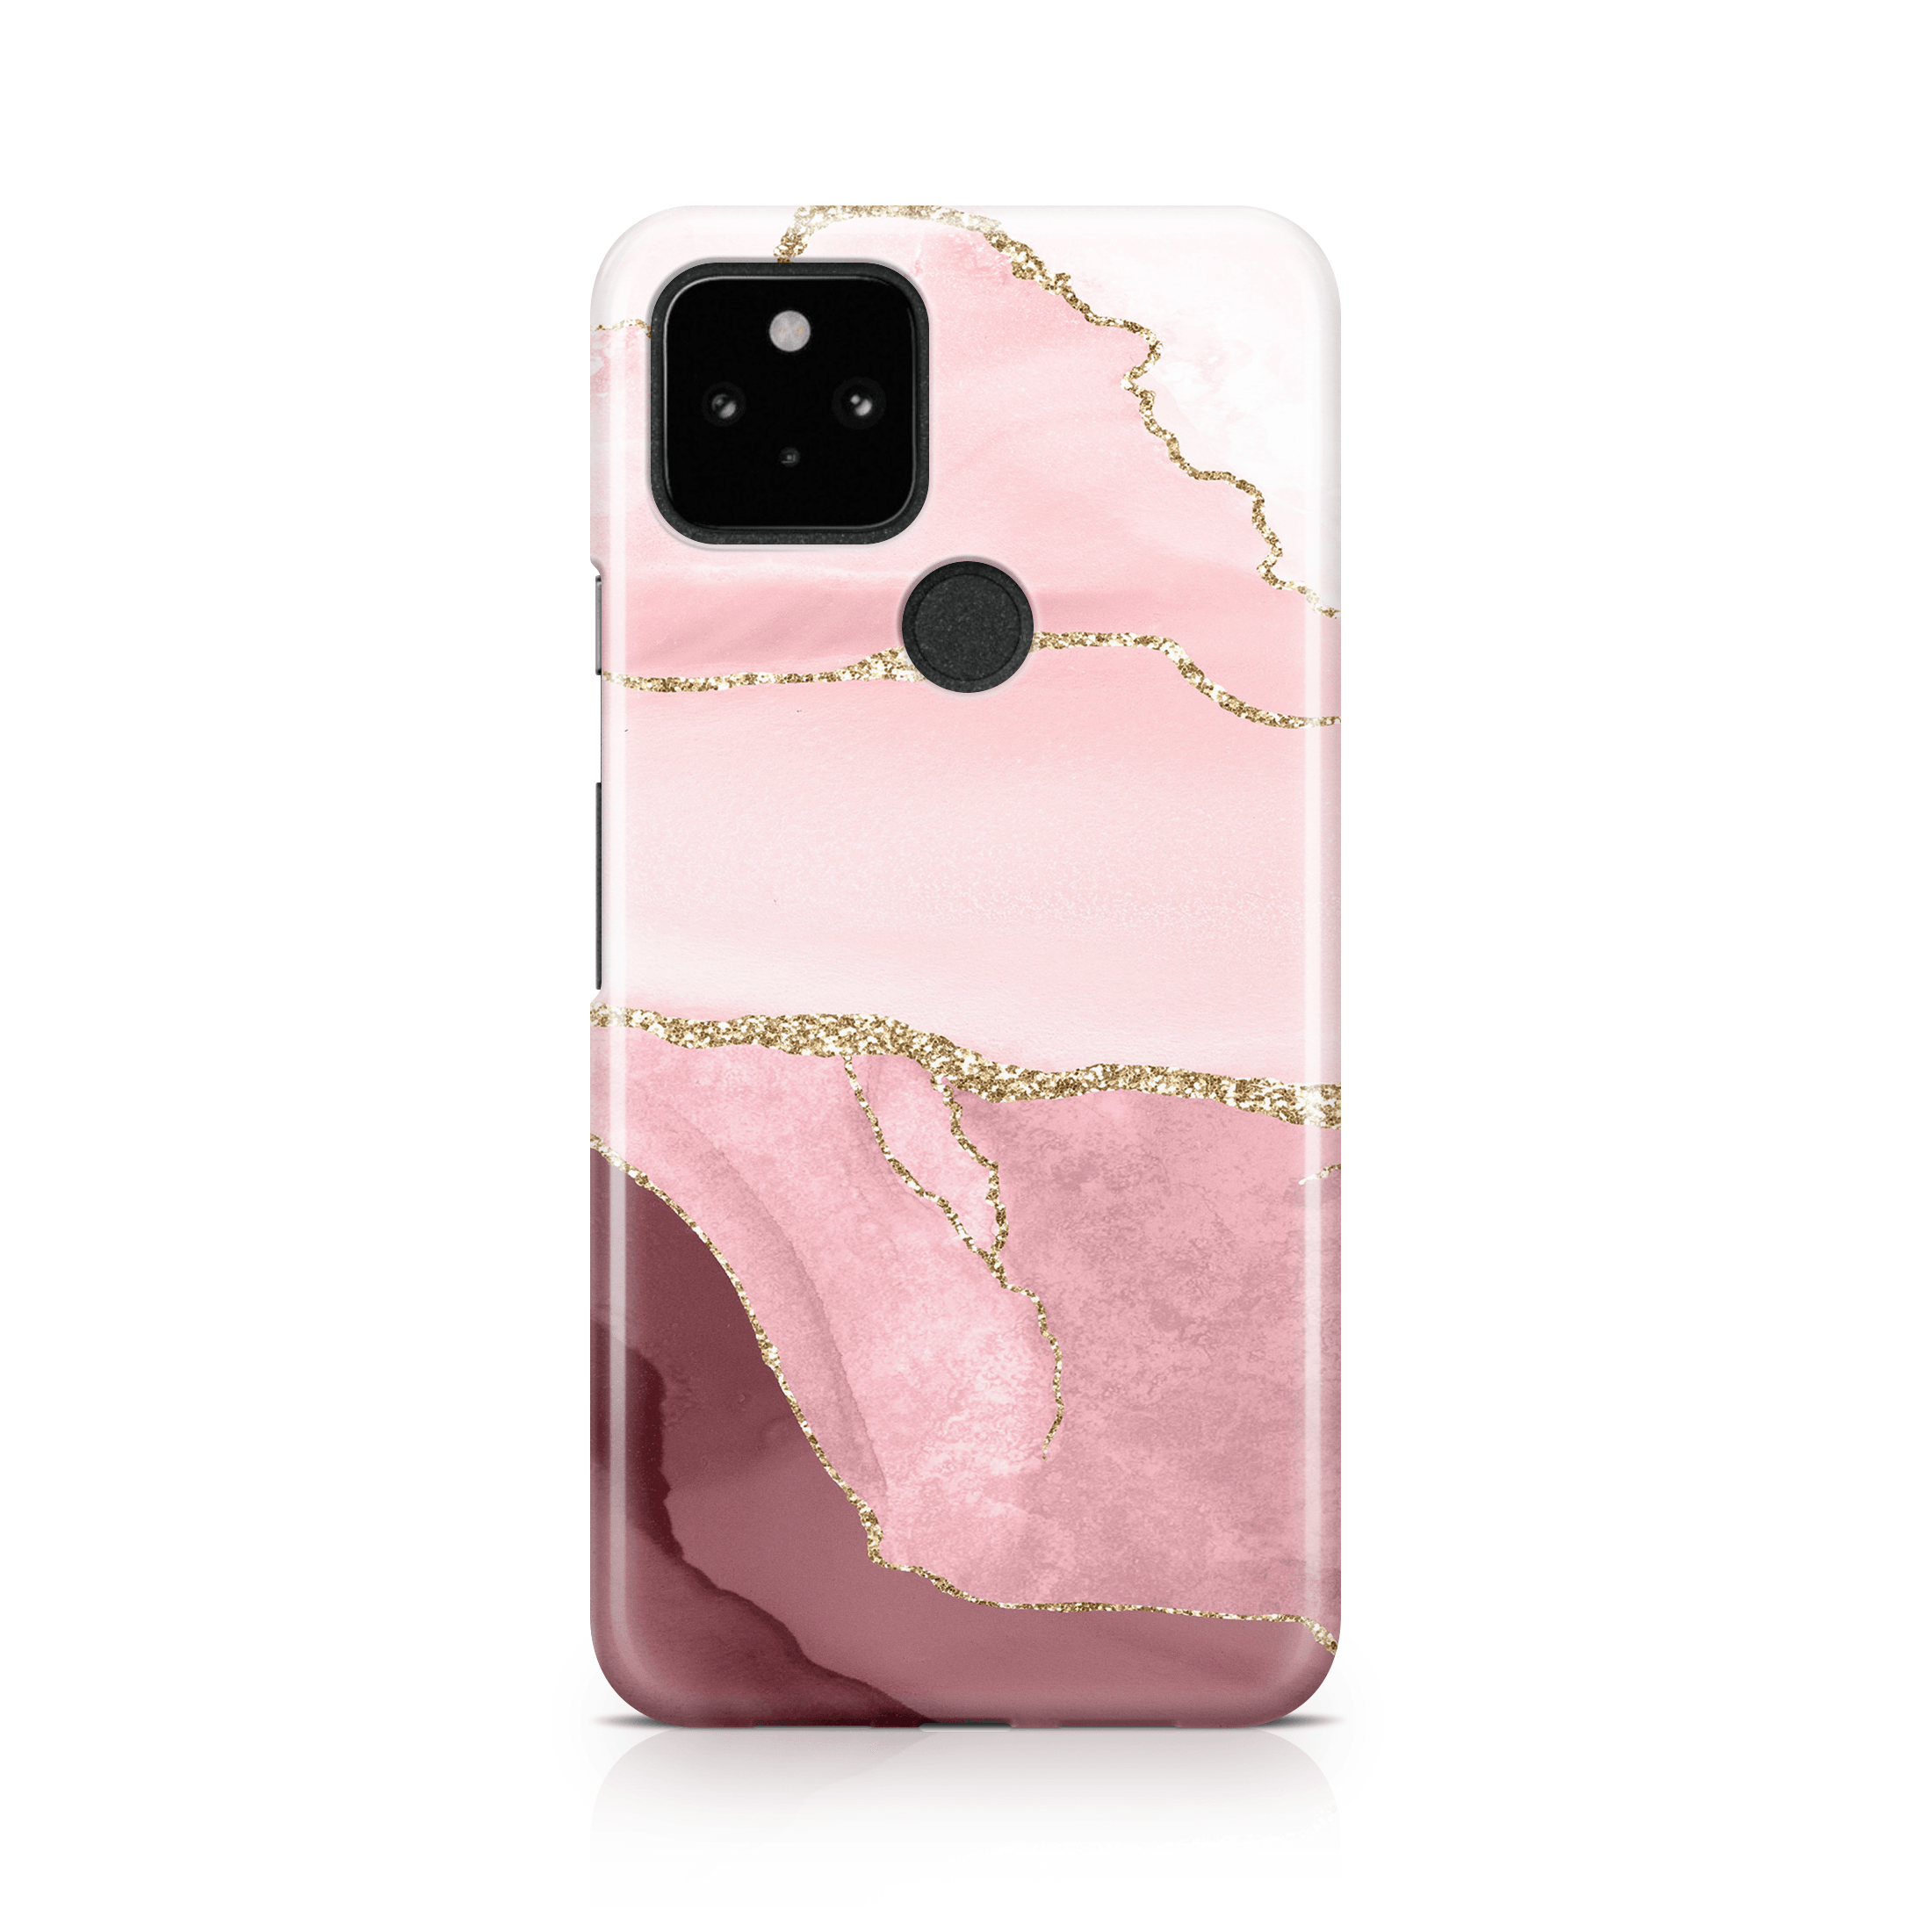 Blush Elegance I - Google phone case designs by CaseSwagger